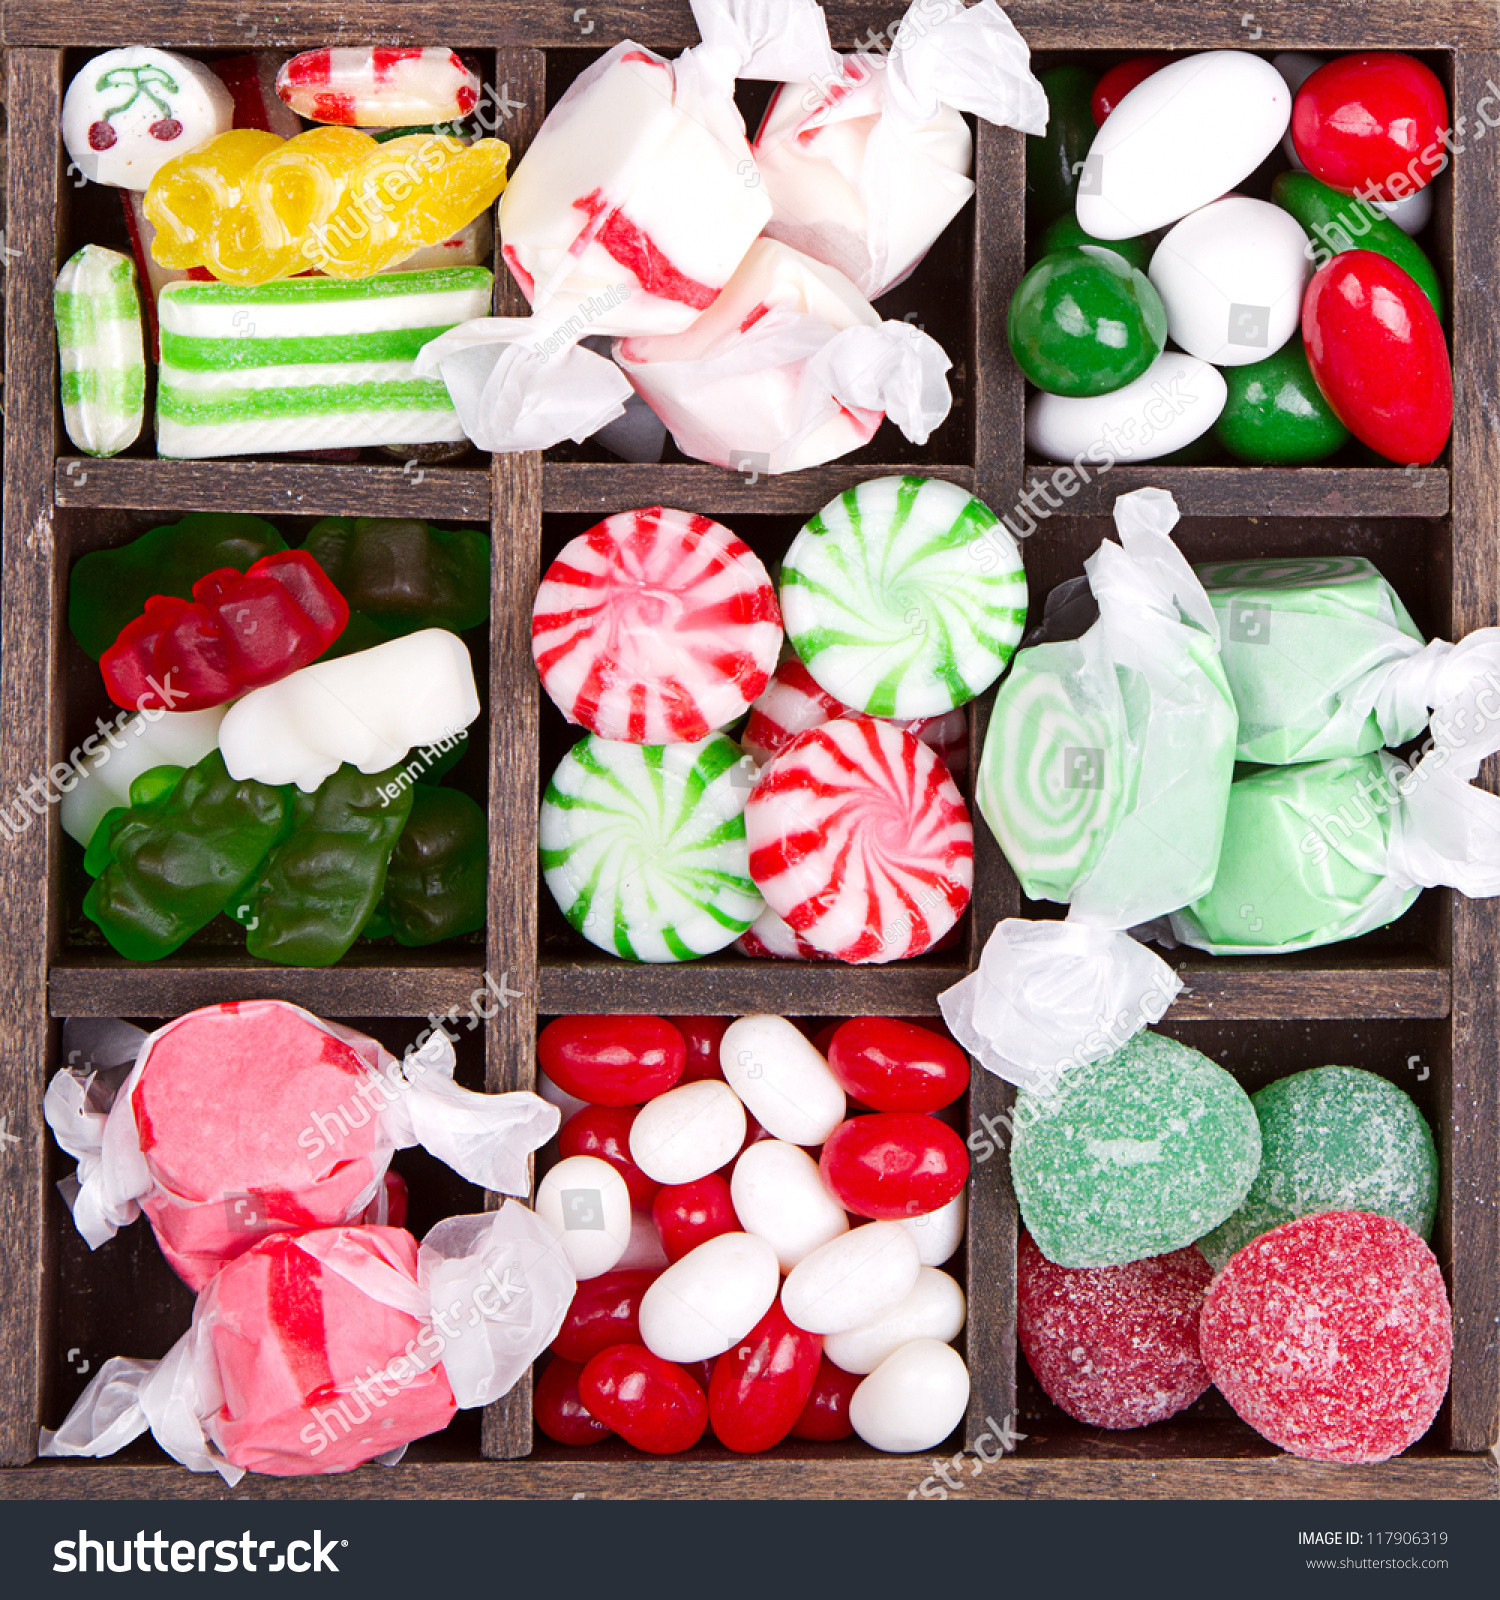 Assorted Christmas Candy
 Assorted Christmas Candy In A Printers Box Stock